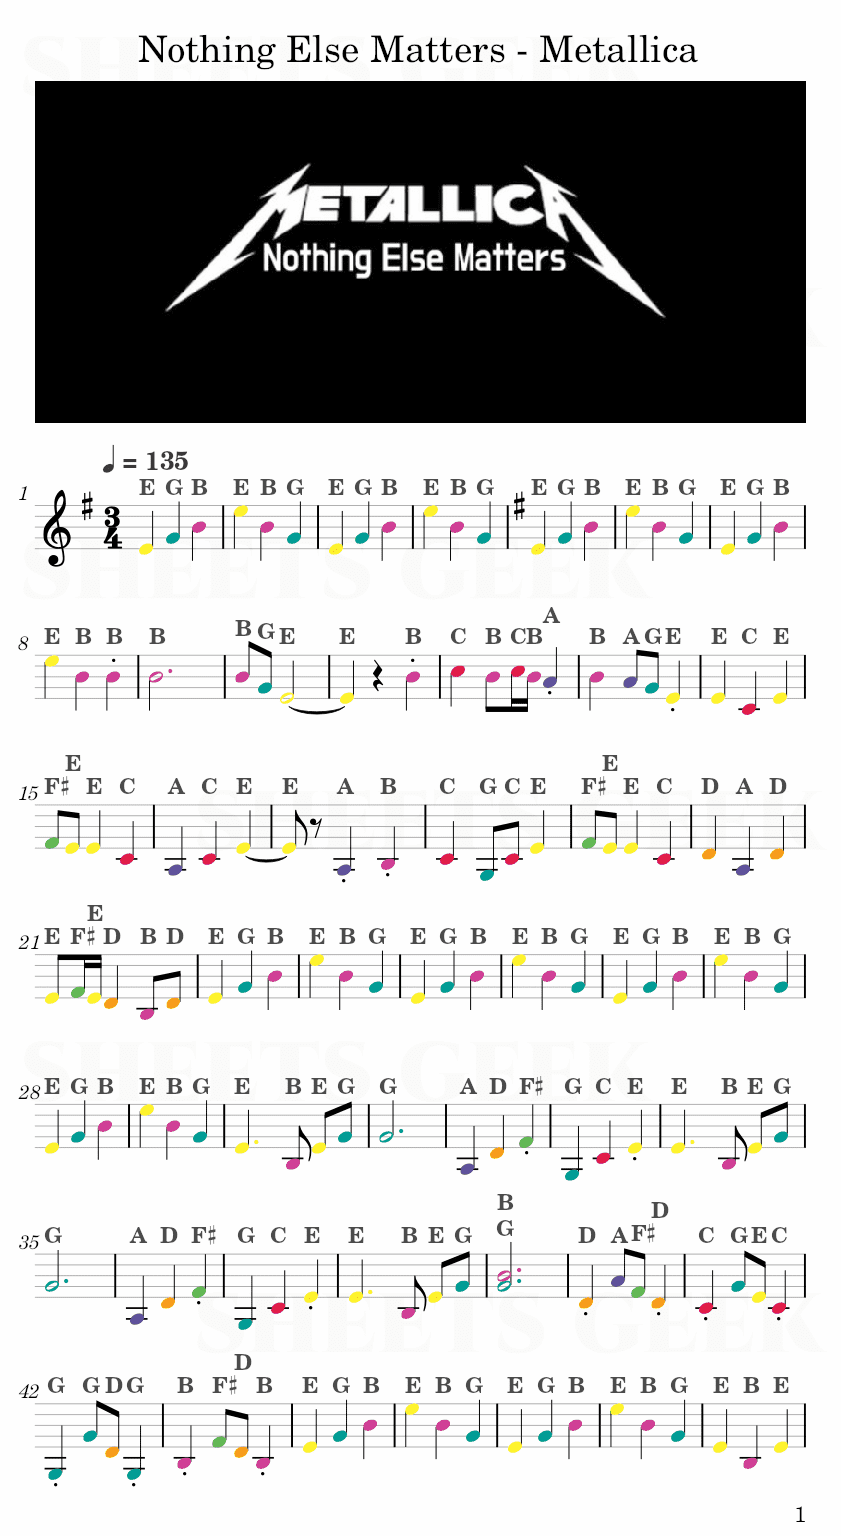 Nothing Else Matters - Metallica Easy Sheet Music Free for piano, keyboard, flute, violin, sax, cello page 1